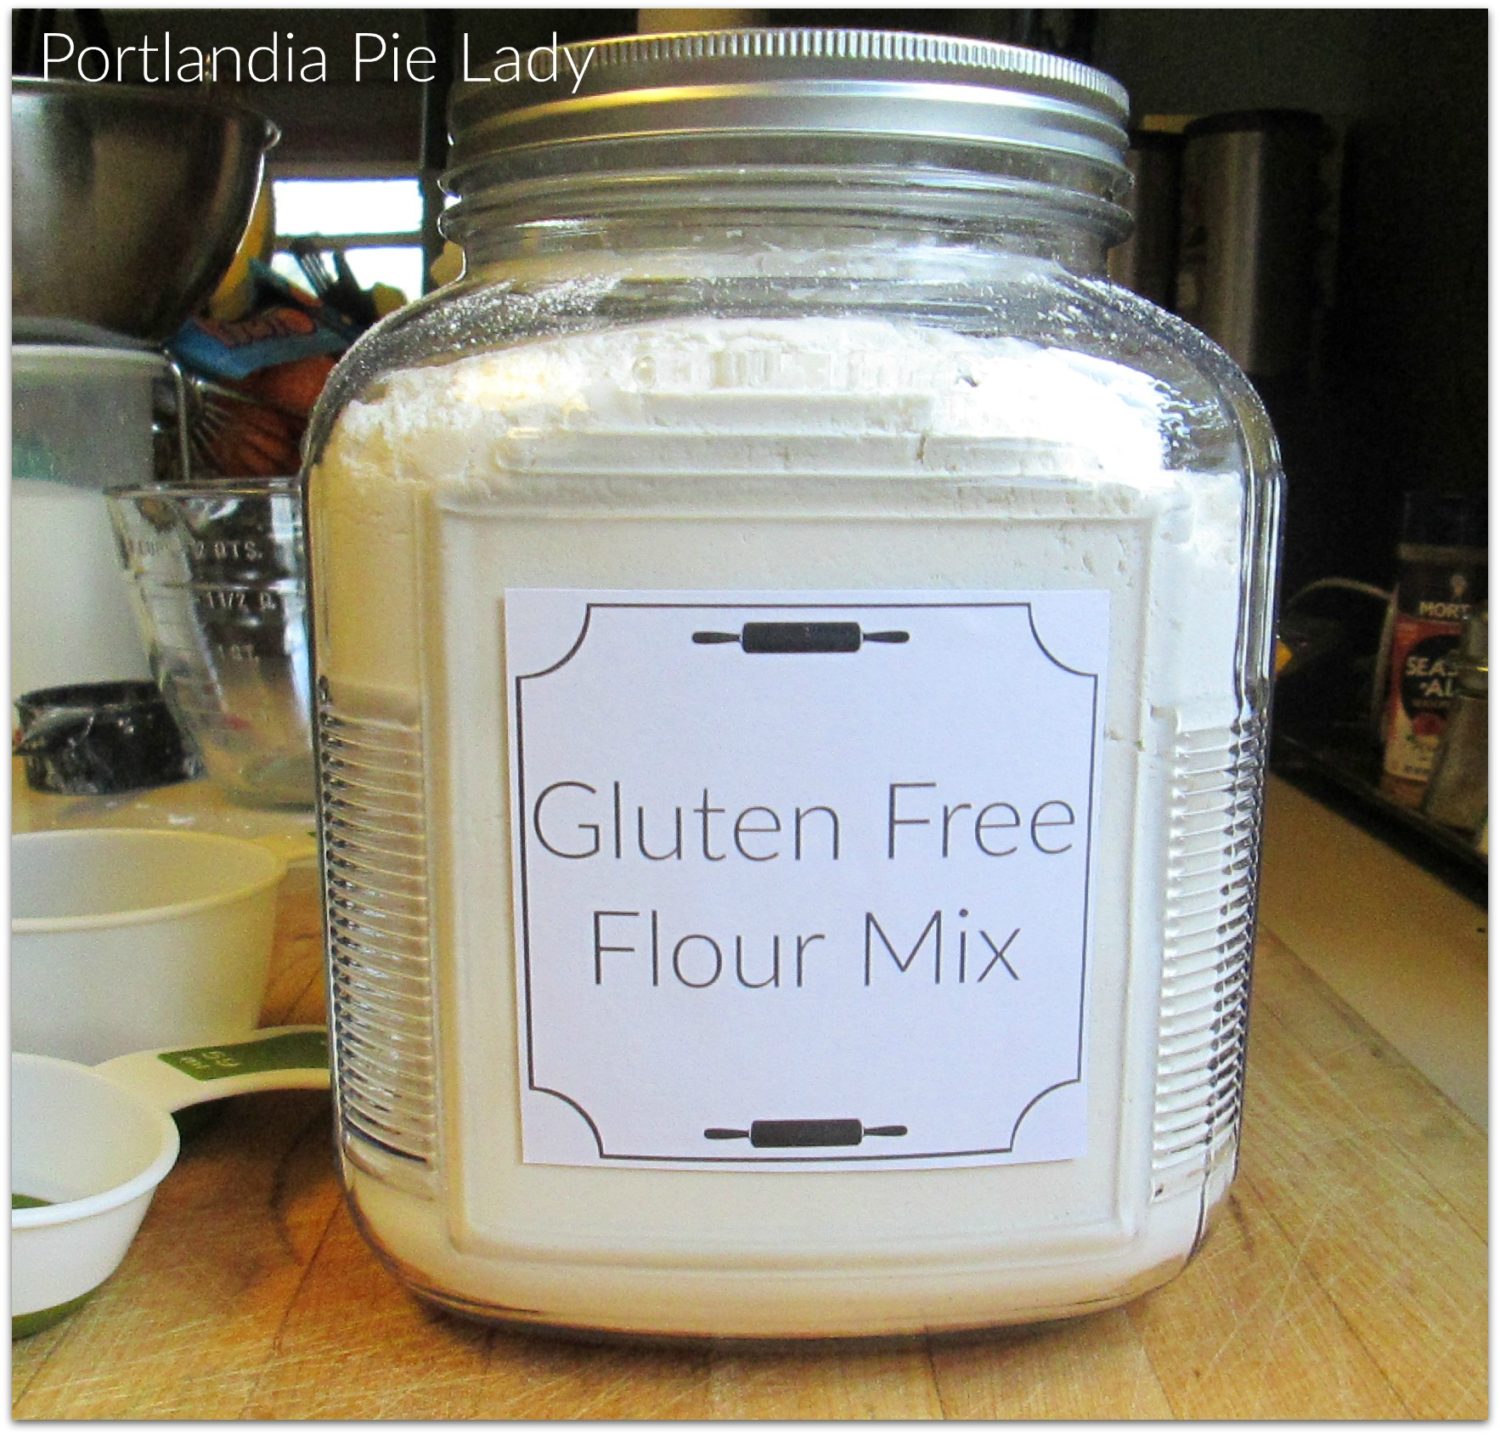 Gluten Free Flour Mix works like magic in making gluten free pie crust. You won't be missing out on a single pie ever again!